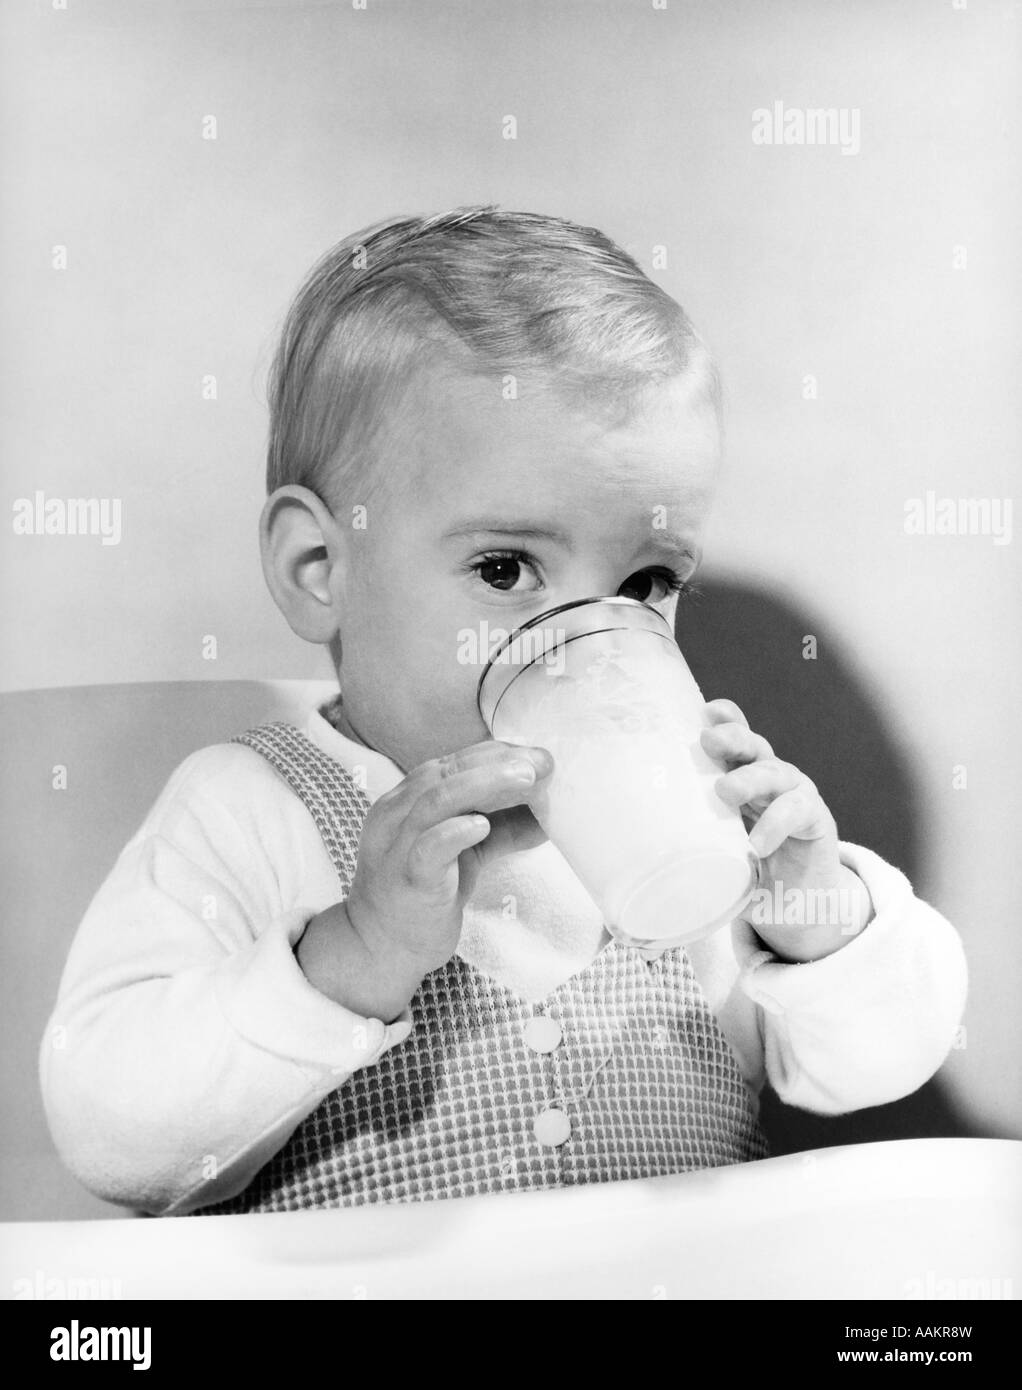 1950s BOY TODDLER DRINKING GLASS MILK LOOKING AT CAMERA Stock Photo